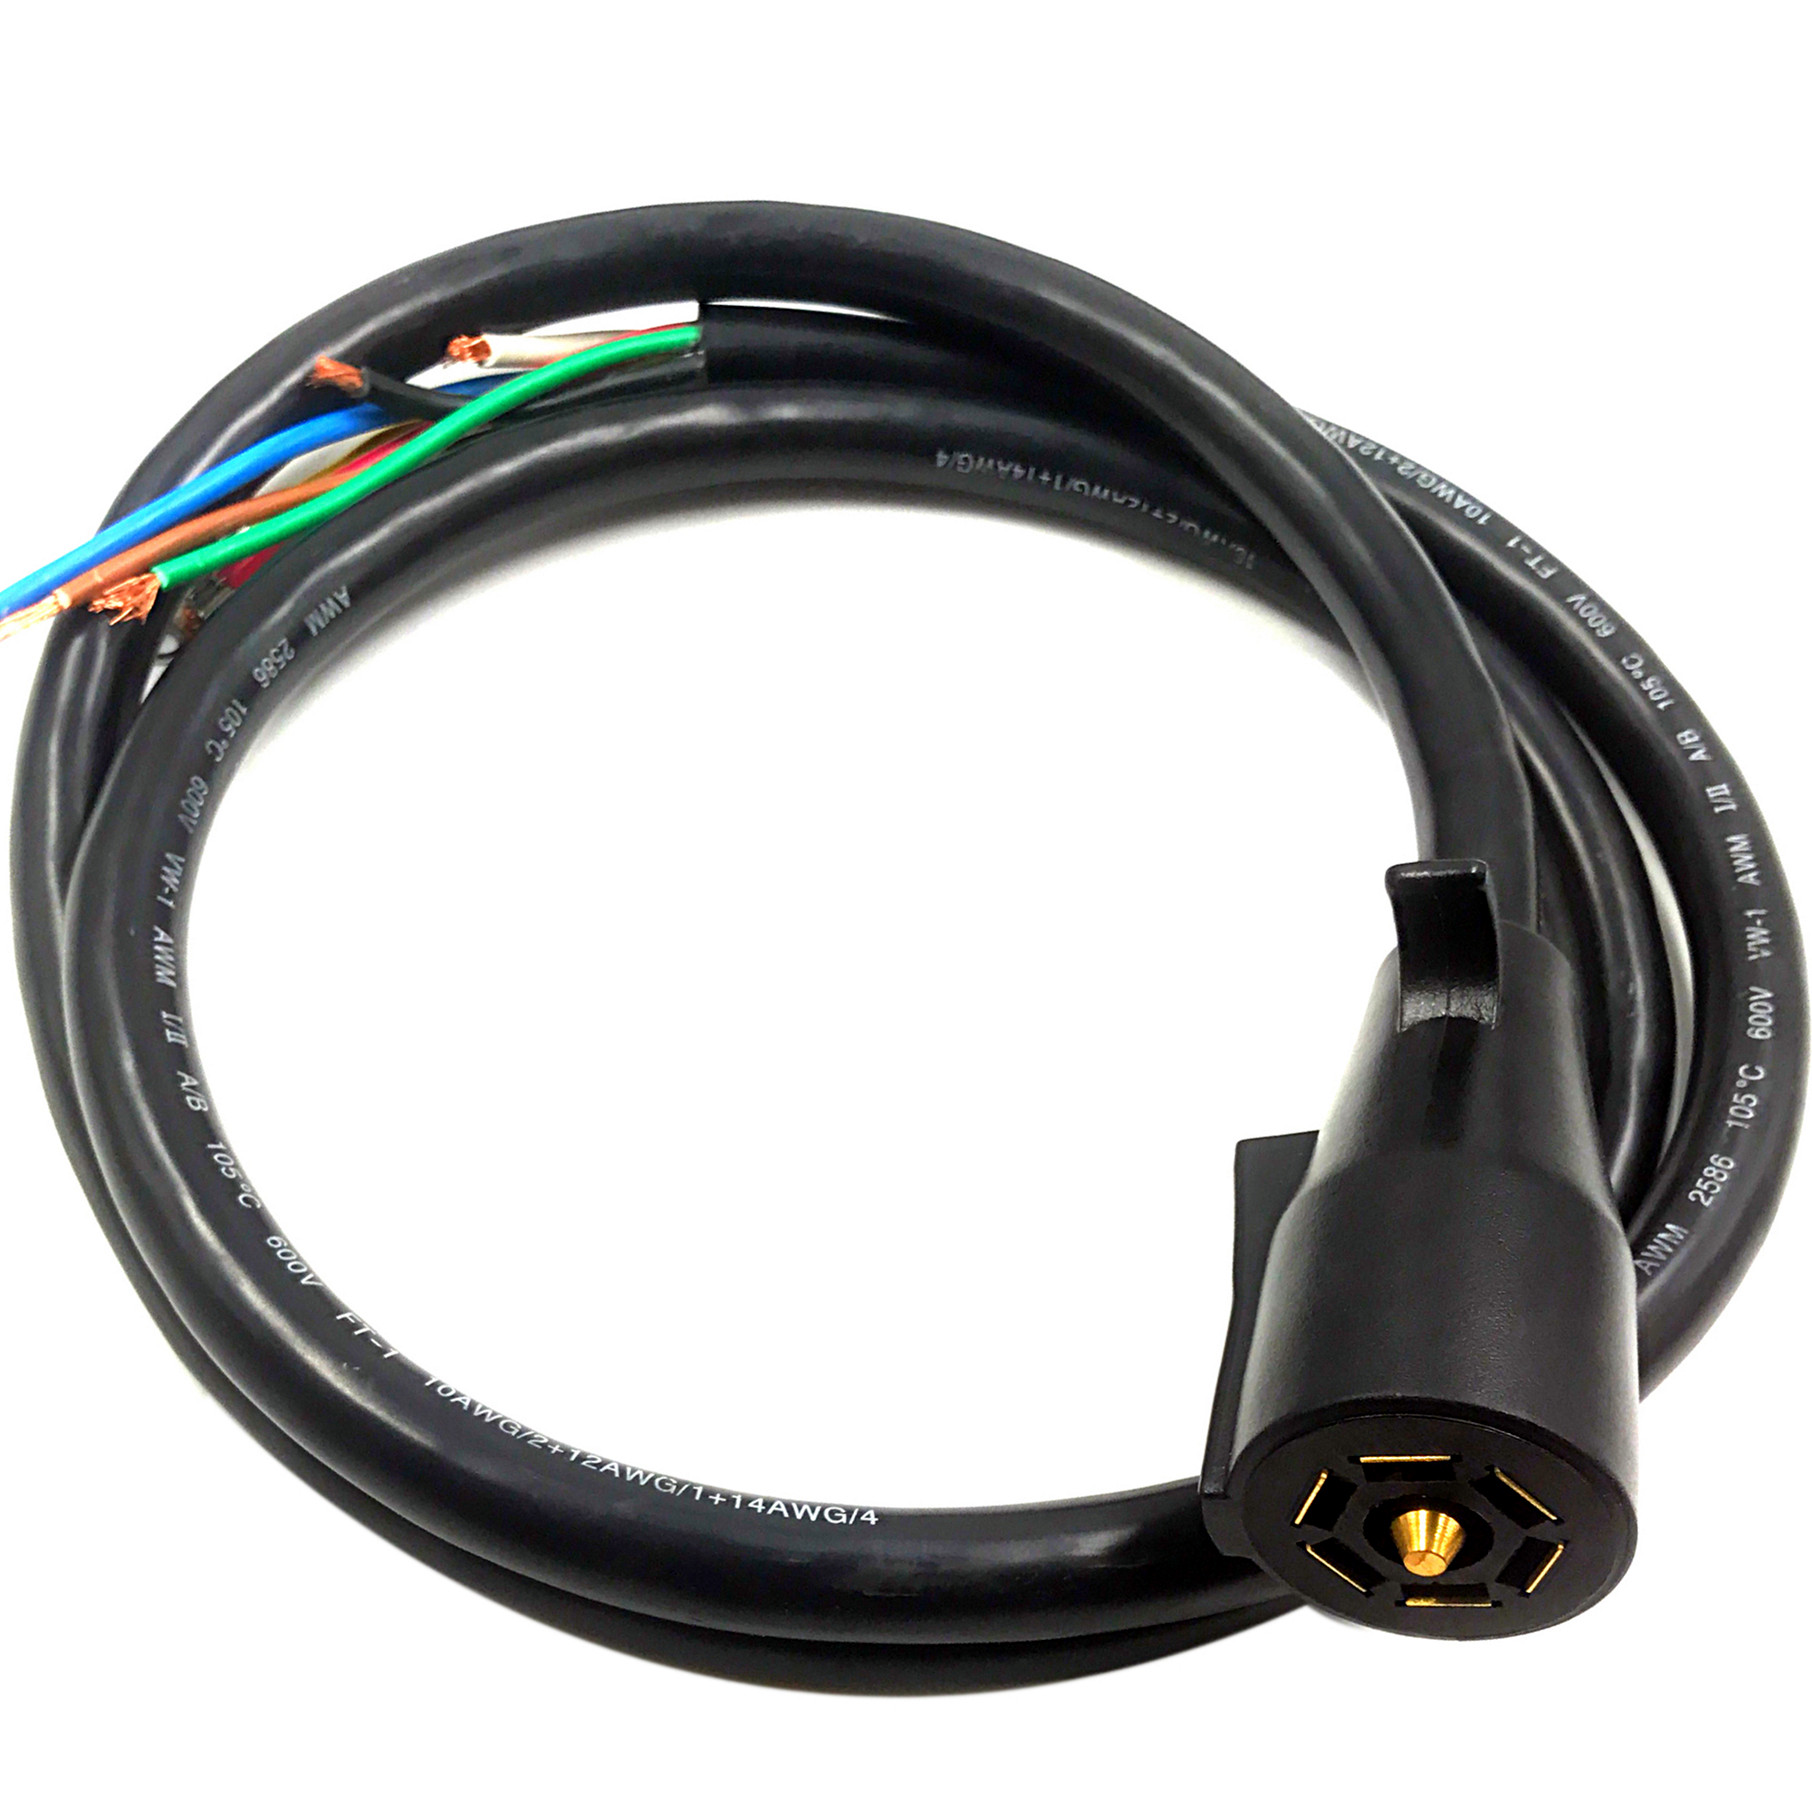 Super Quality 7pin Truck Plug Cable Made in China